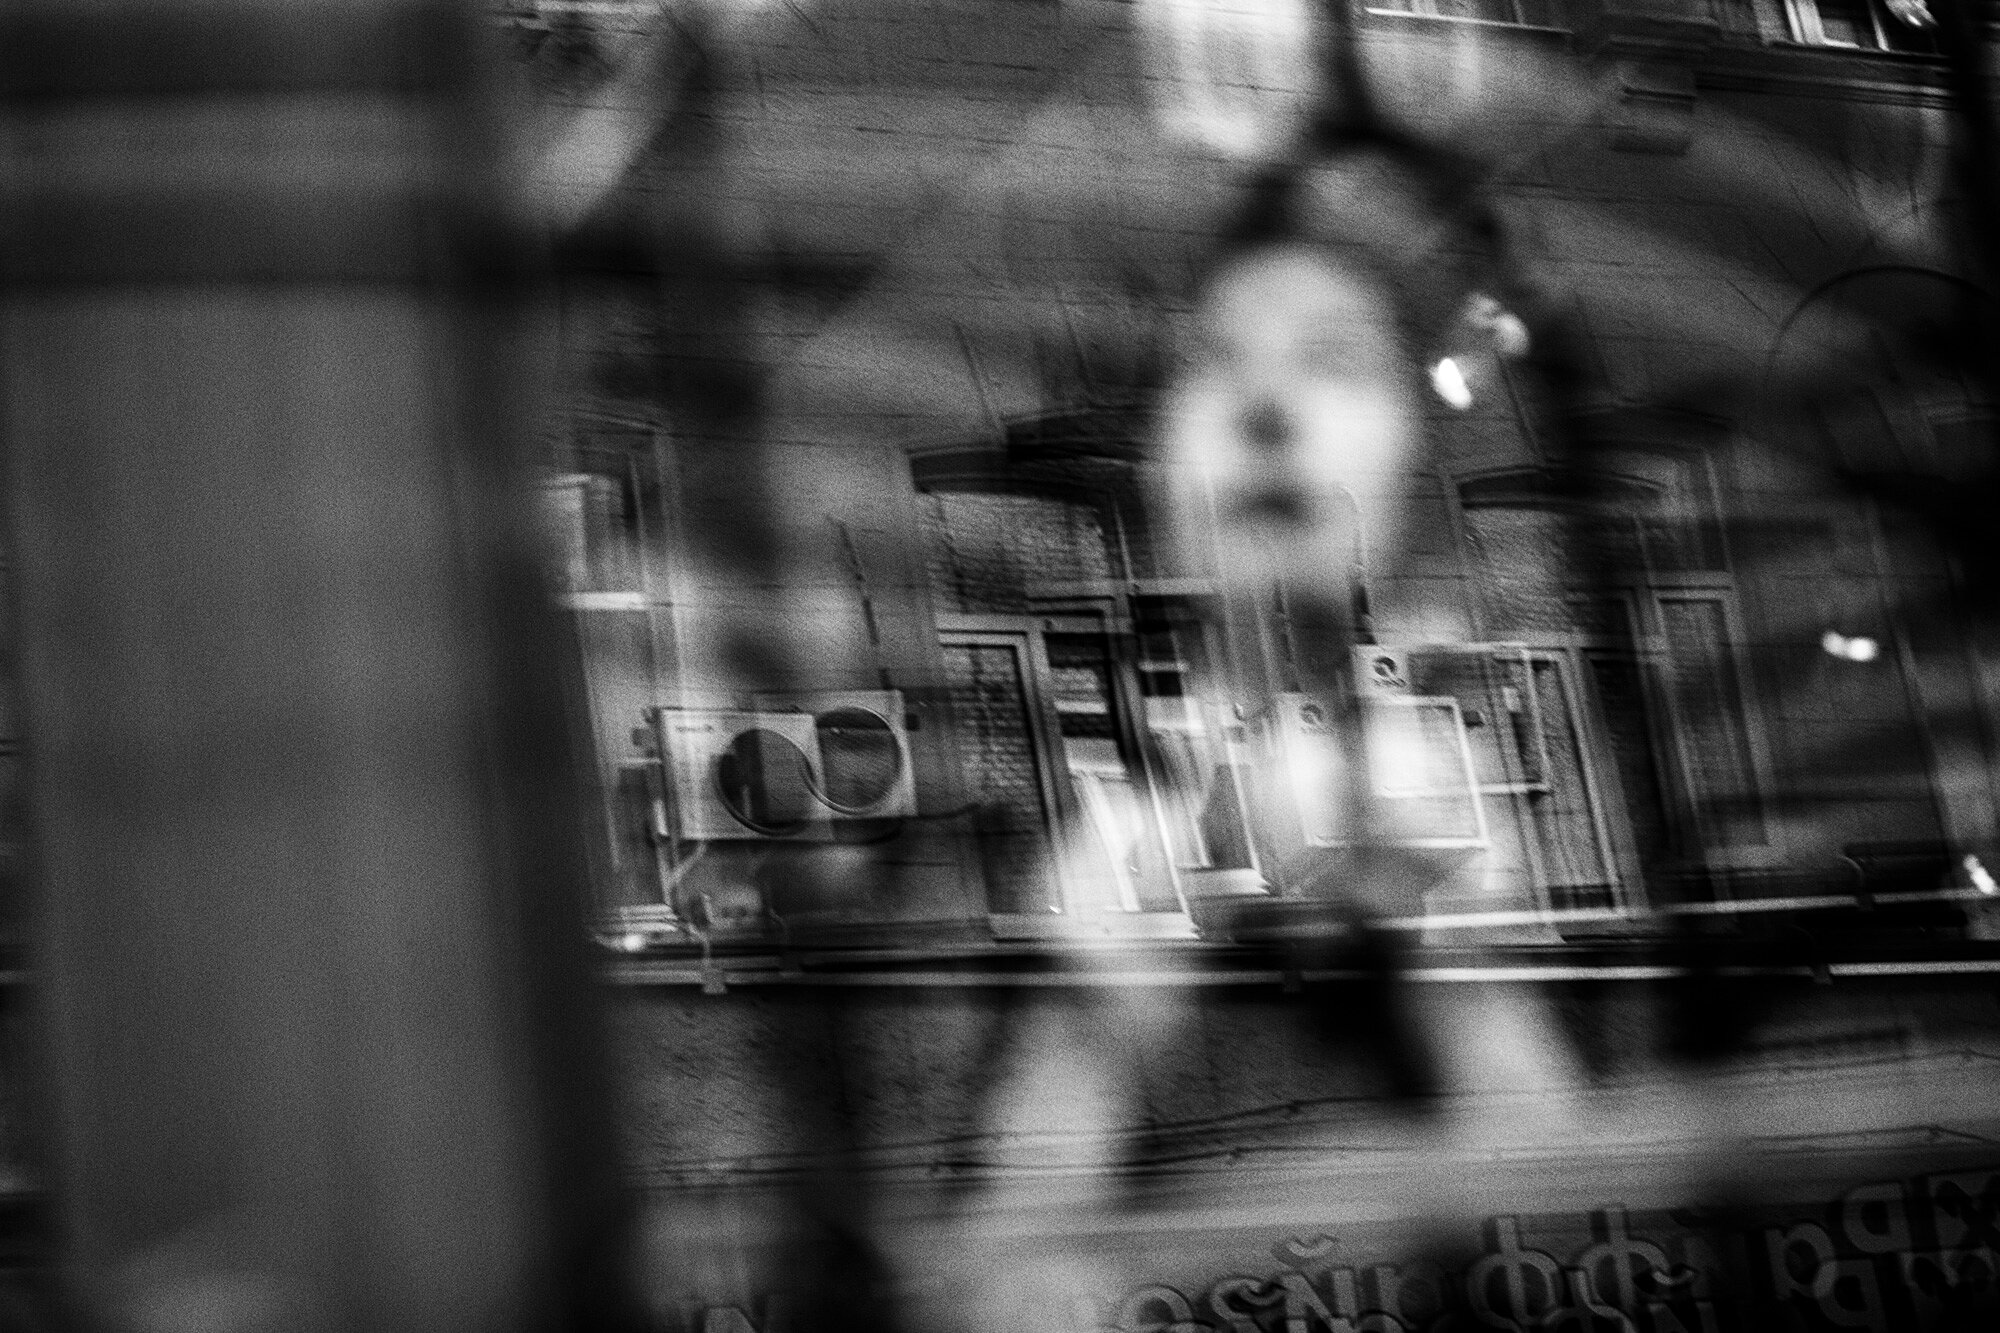 Window reflections, 2015 - Moscow, Russia